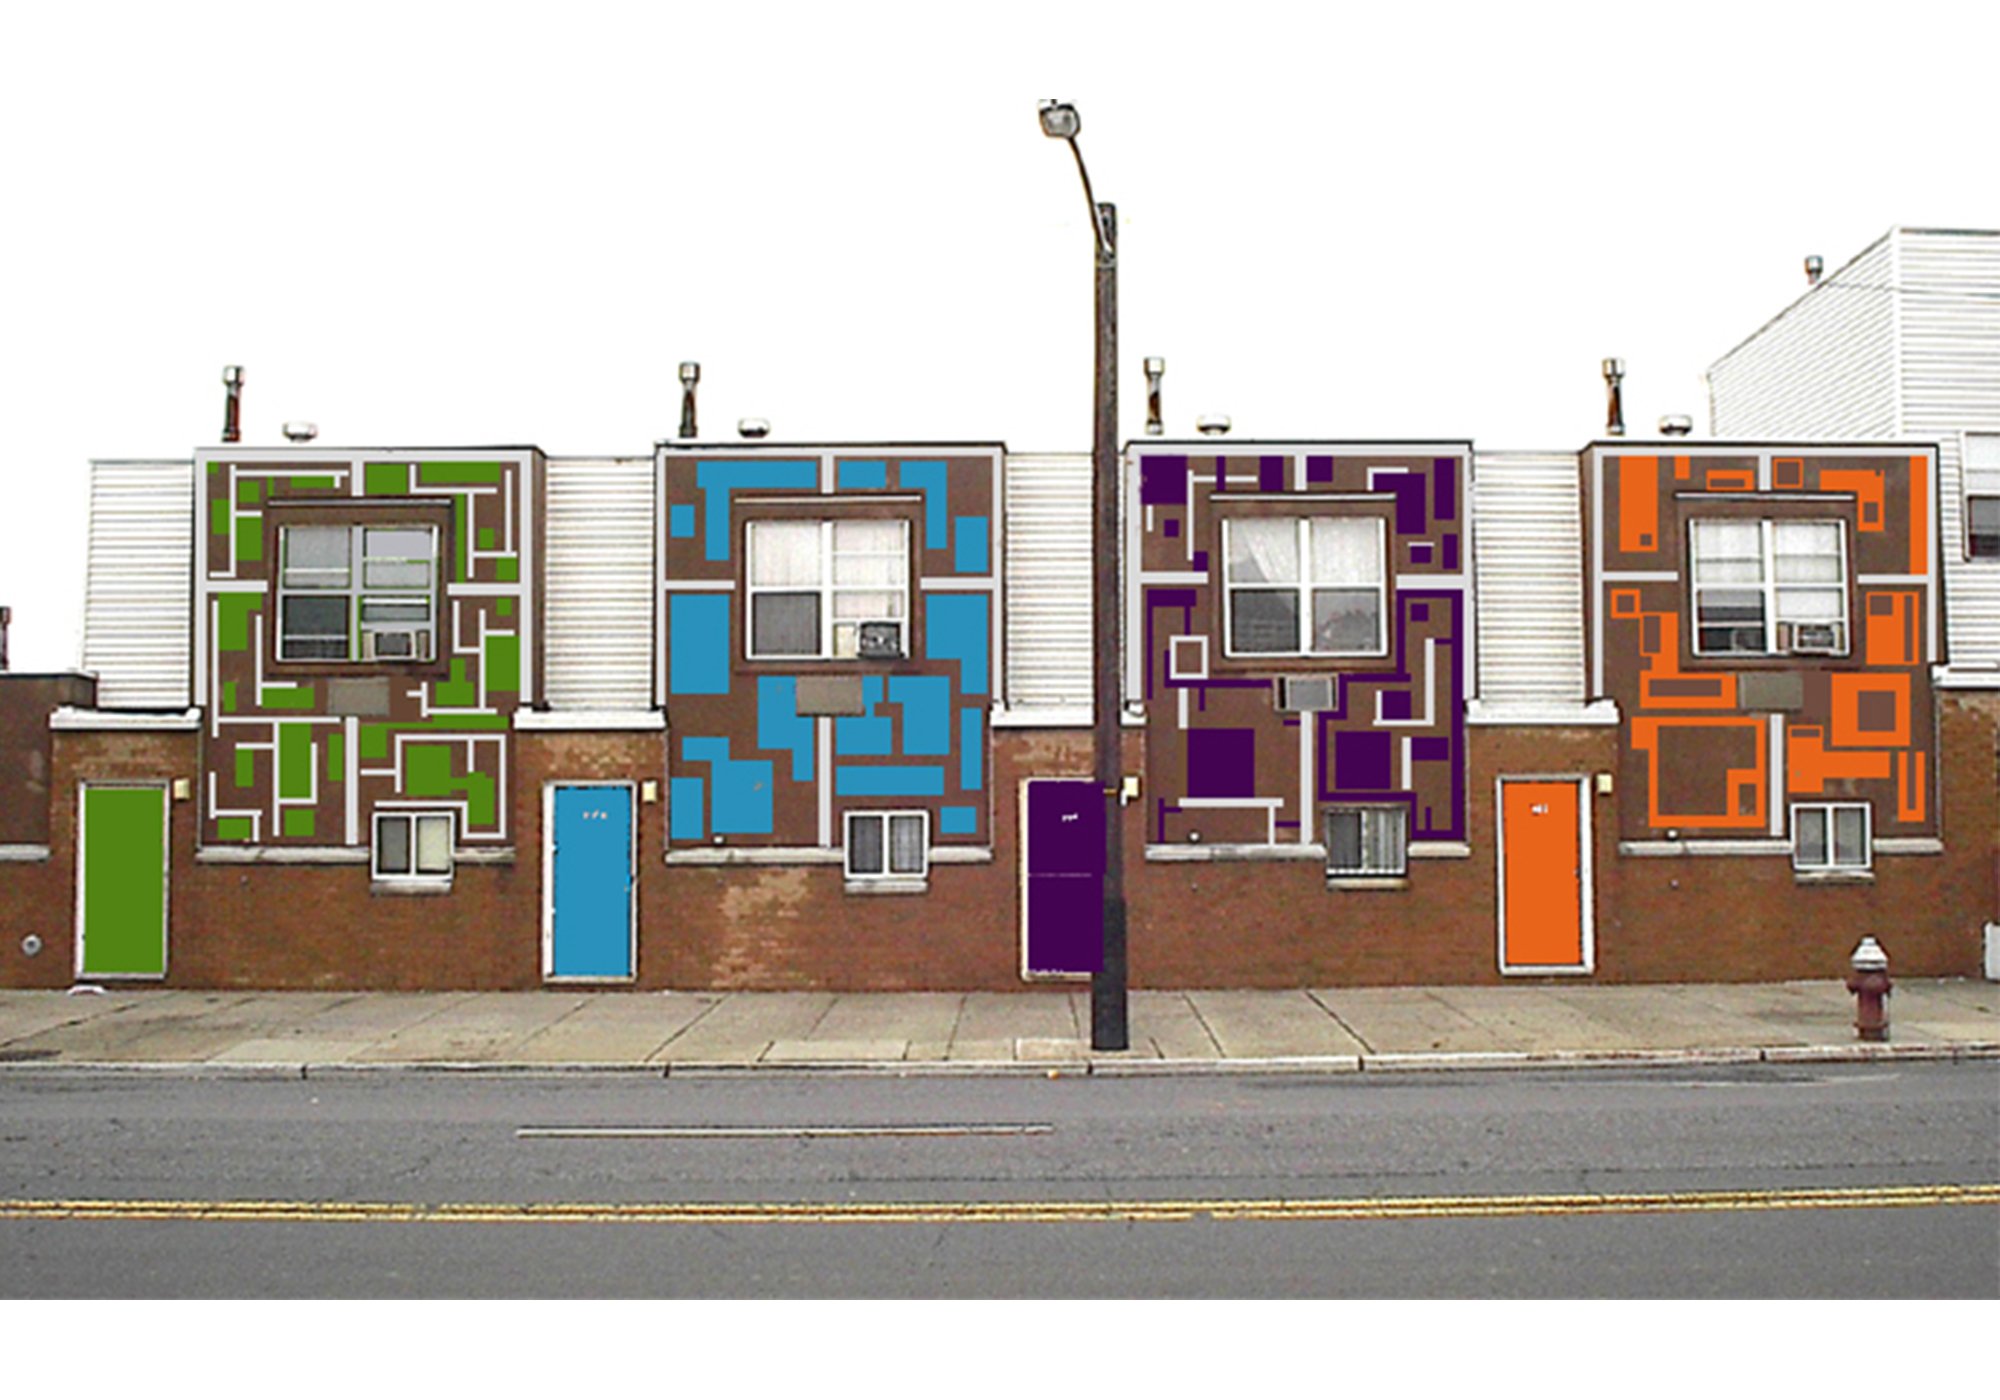 Proposal for Decoration of Lower Income Housing, Jersey City ,NJ.